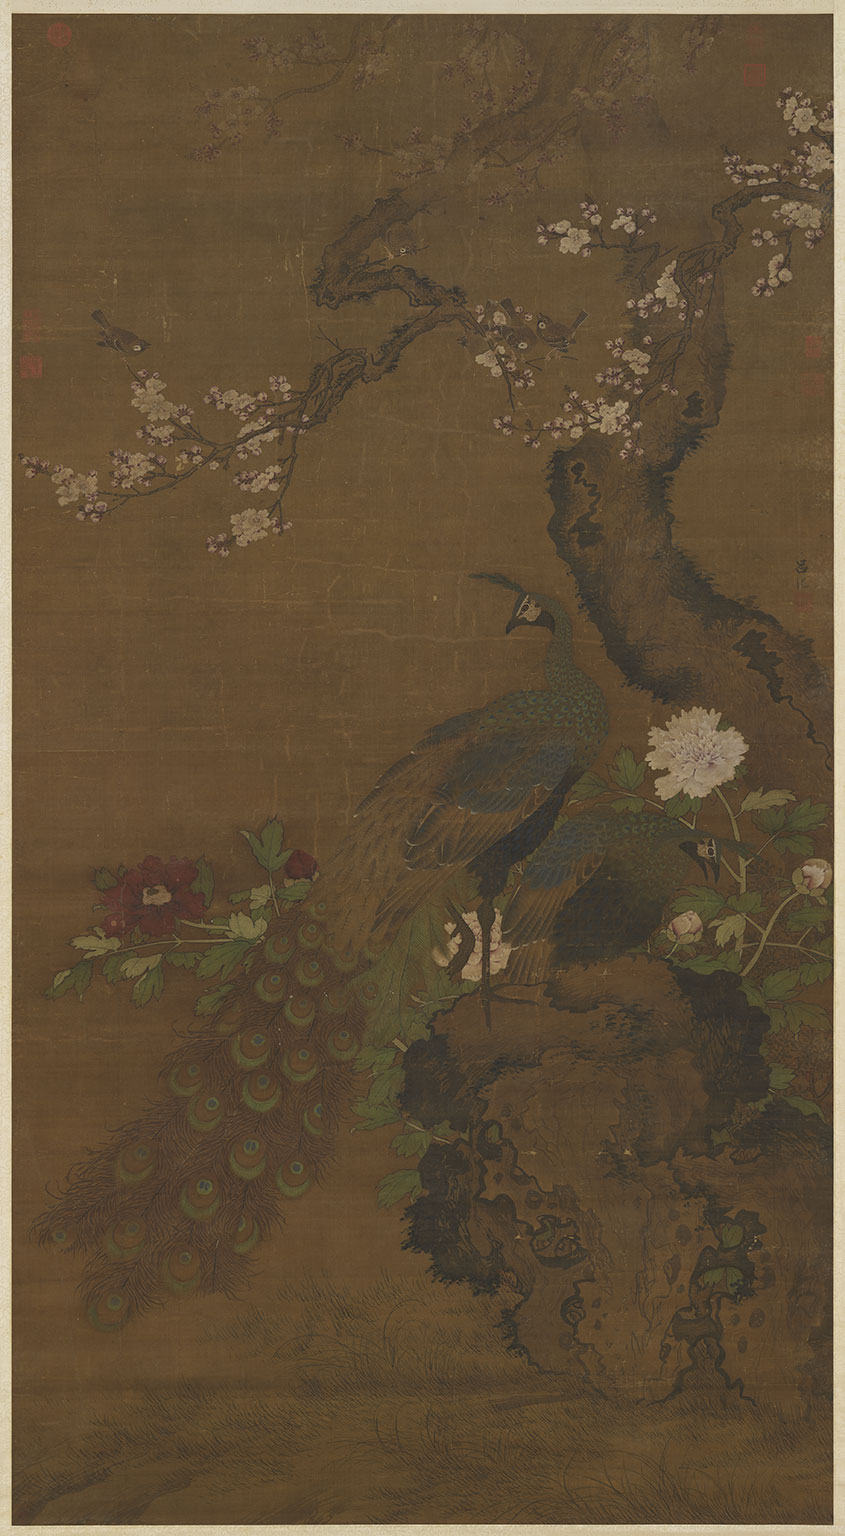 Peacocks and Apricot Blossoms